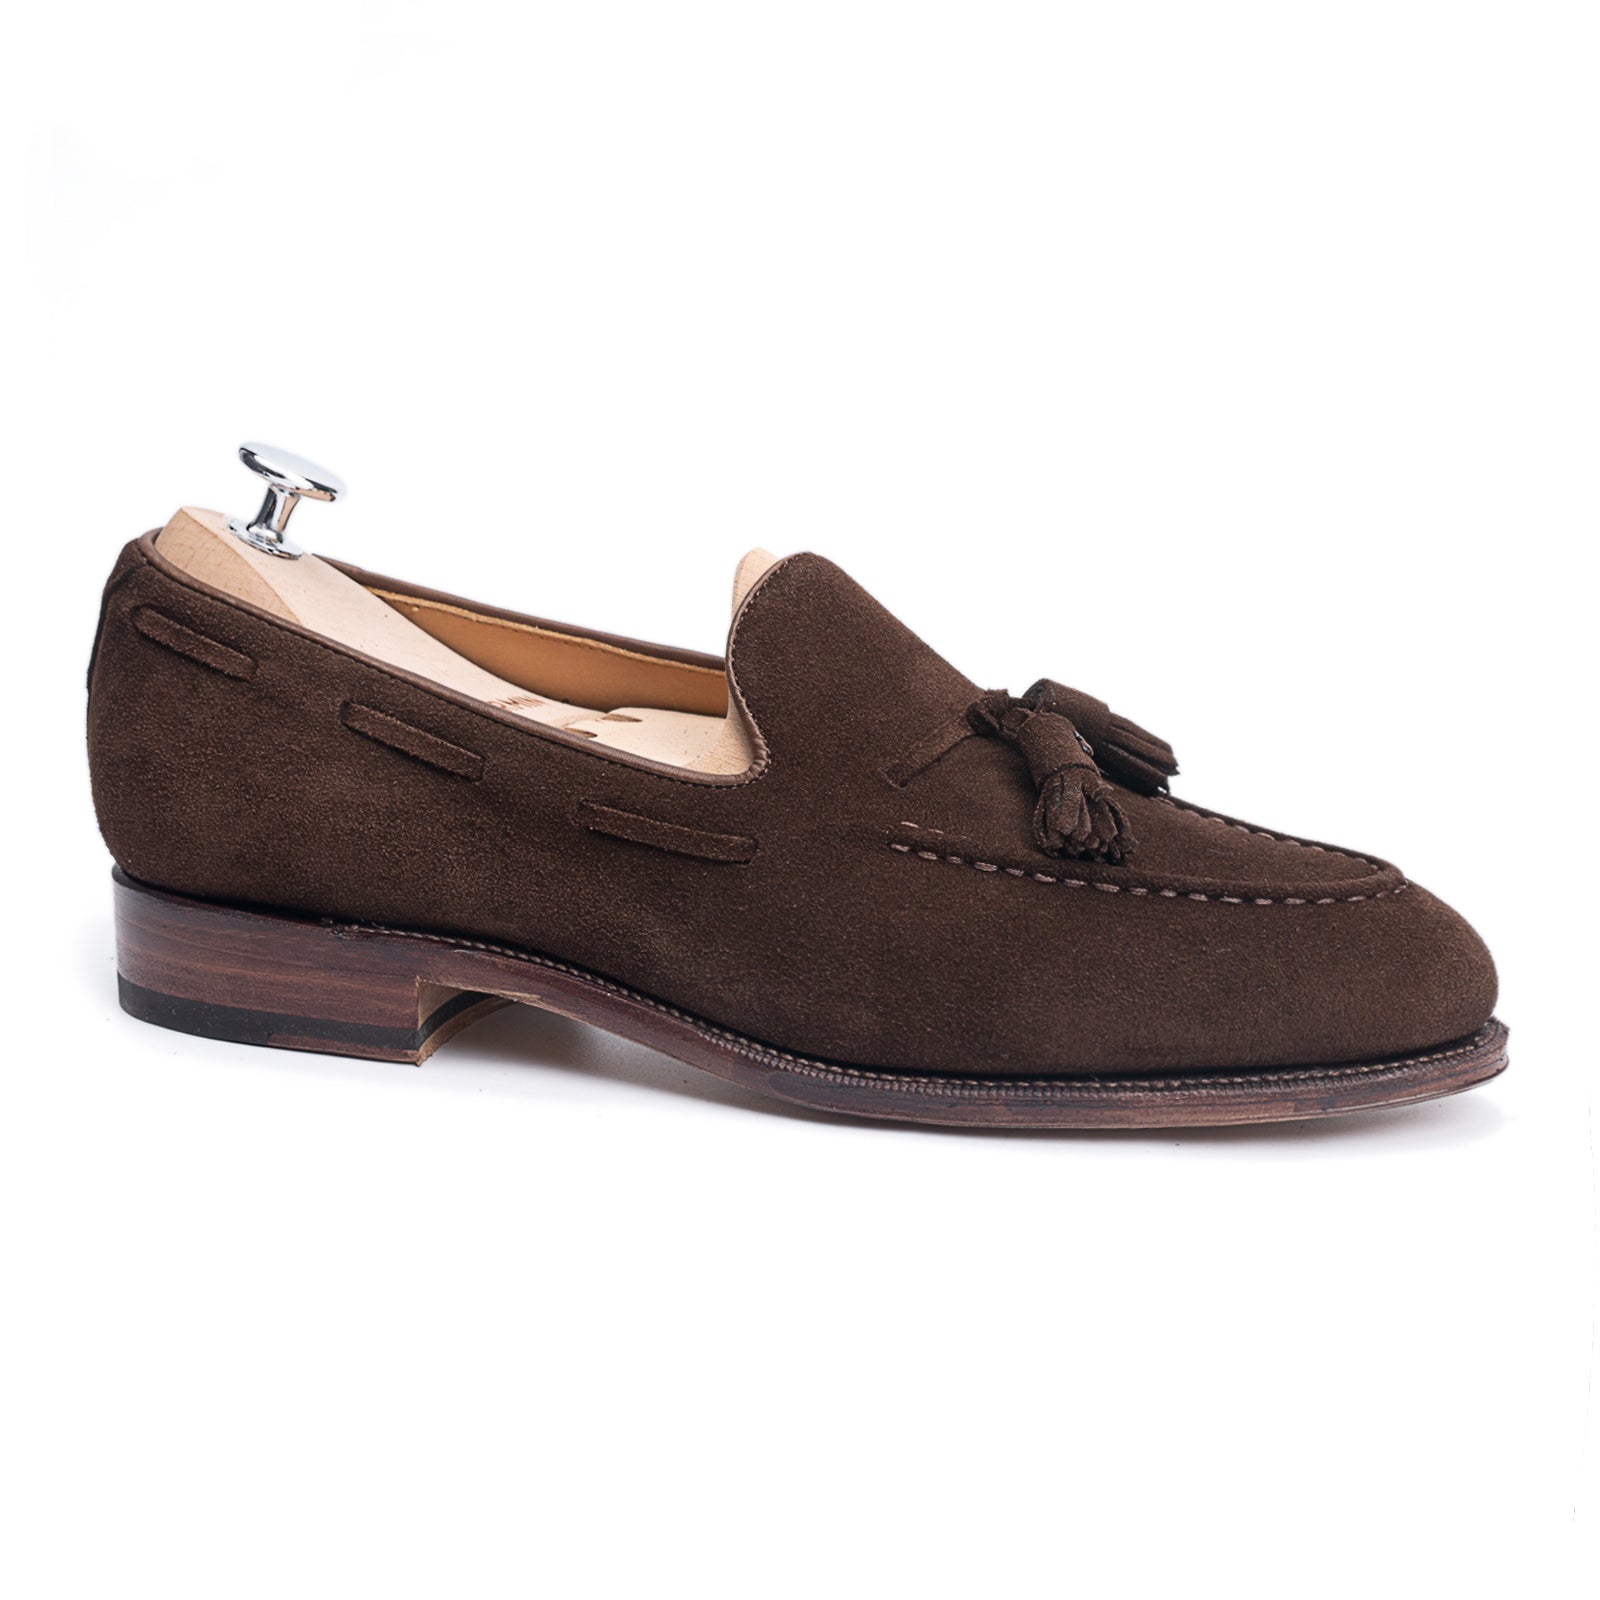 101381 - BROWN SUEDE - E – Meermin Shoes